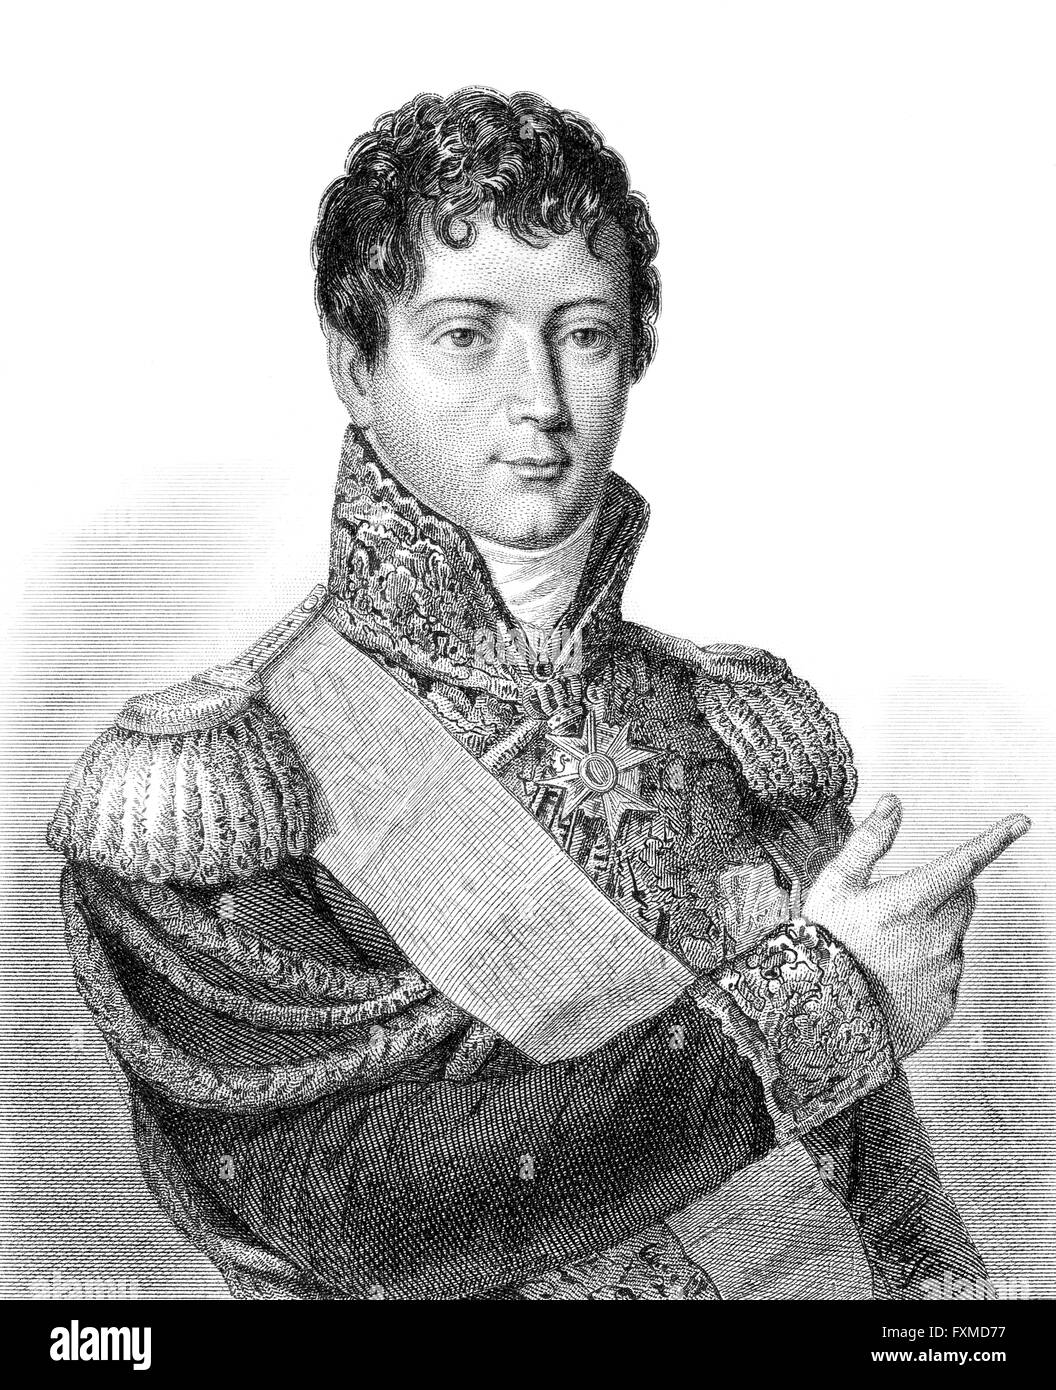 Charles-Étienne César Gudin de La Sablonnière, 1768-1812, a French general during the French Revolutionary Wars and Napoleonic W Stock Photo